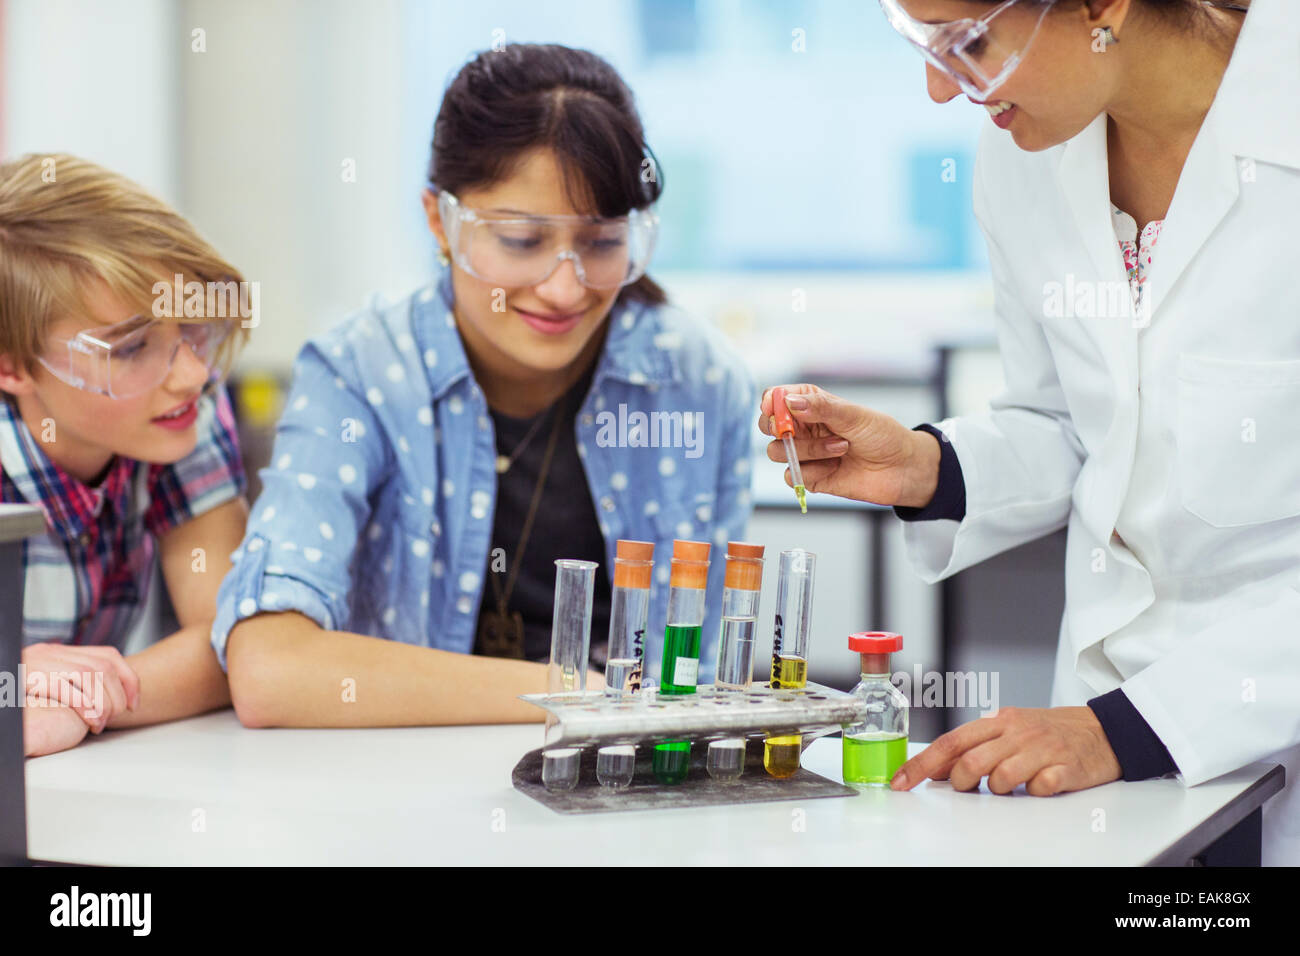 Teacher and students during chemistry lesson, wearing protective eyewear and looking at test tubes Stock Photo